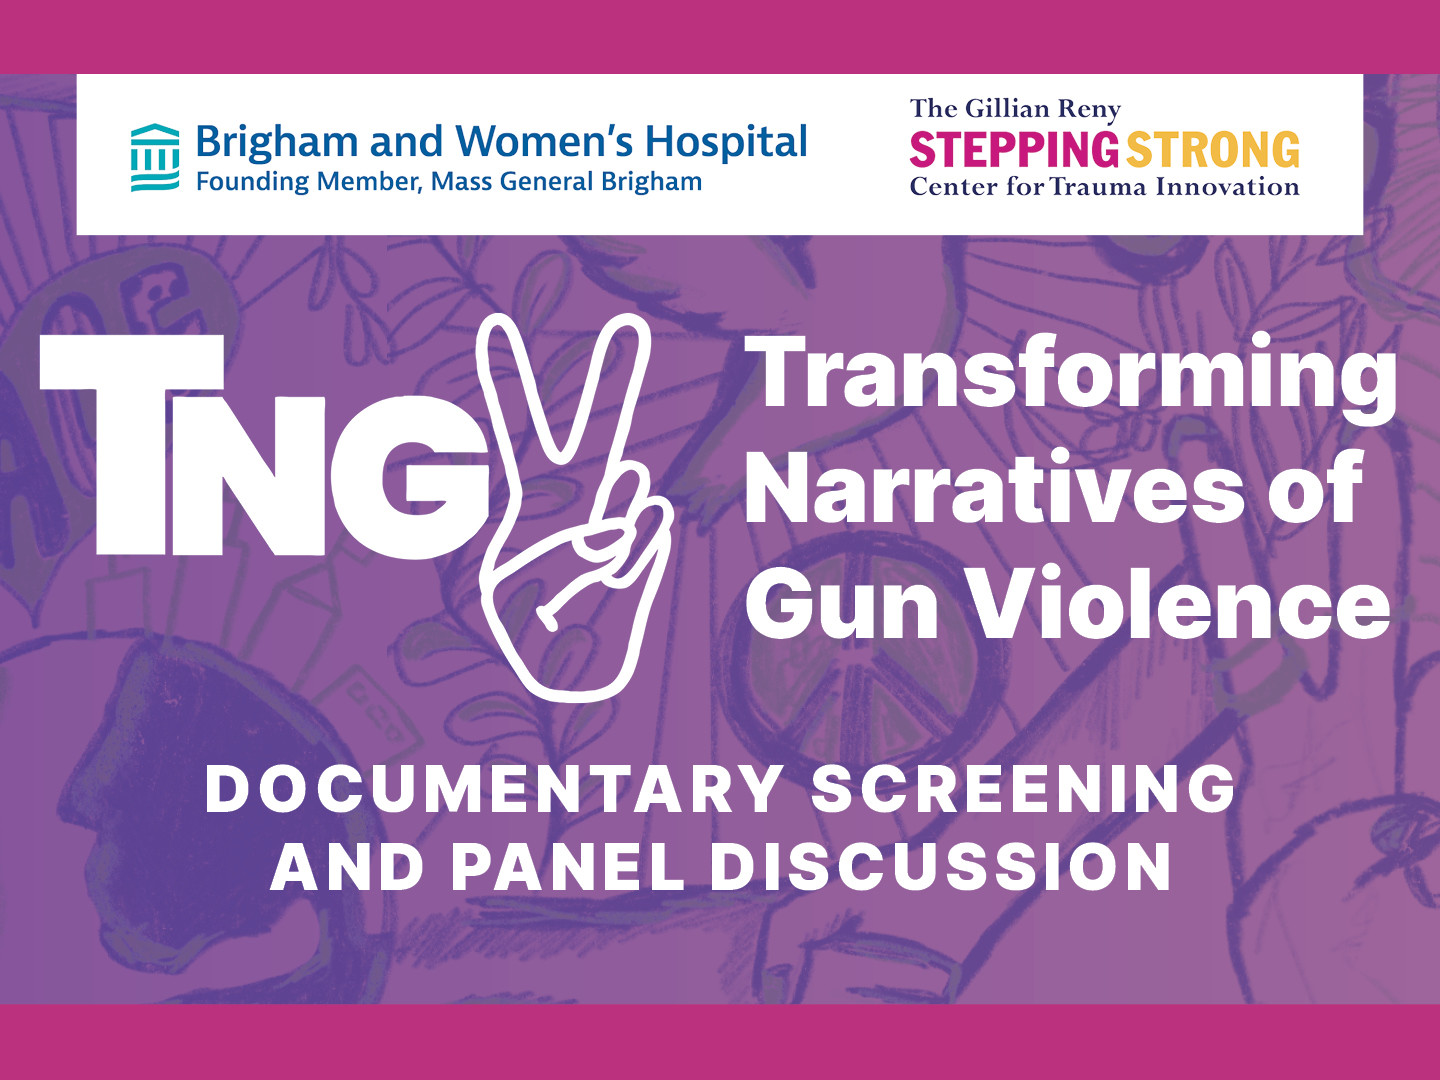 Thumbnail for event with name "Documentary Screening and Discussion at Brigham & Women's Hospital" 